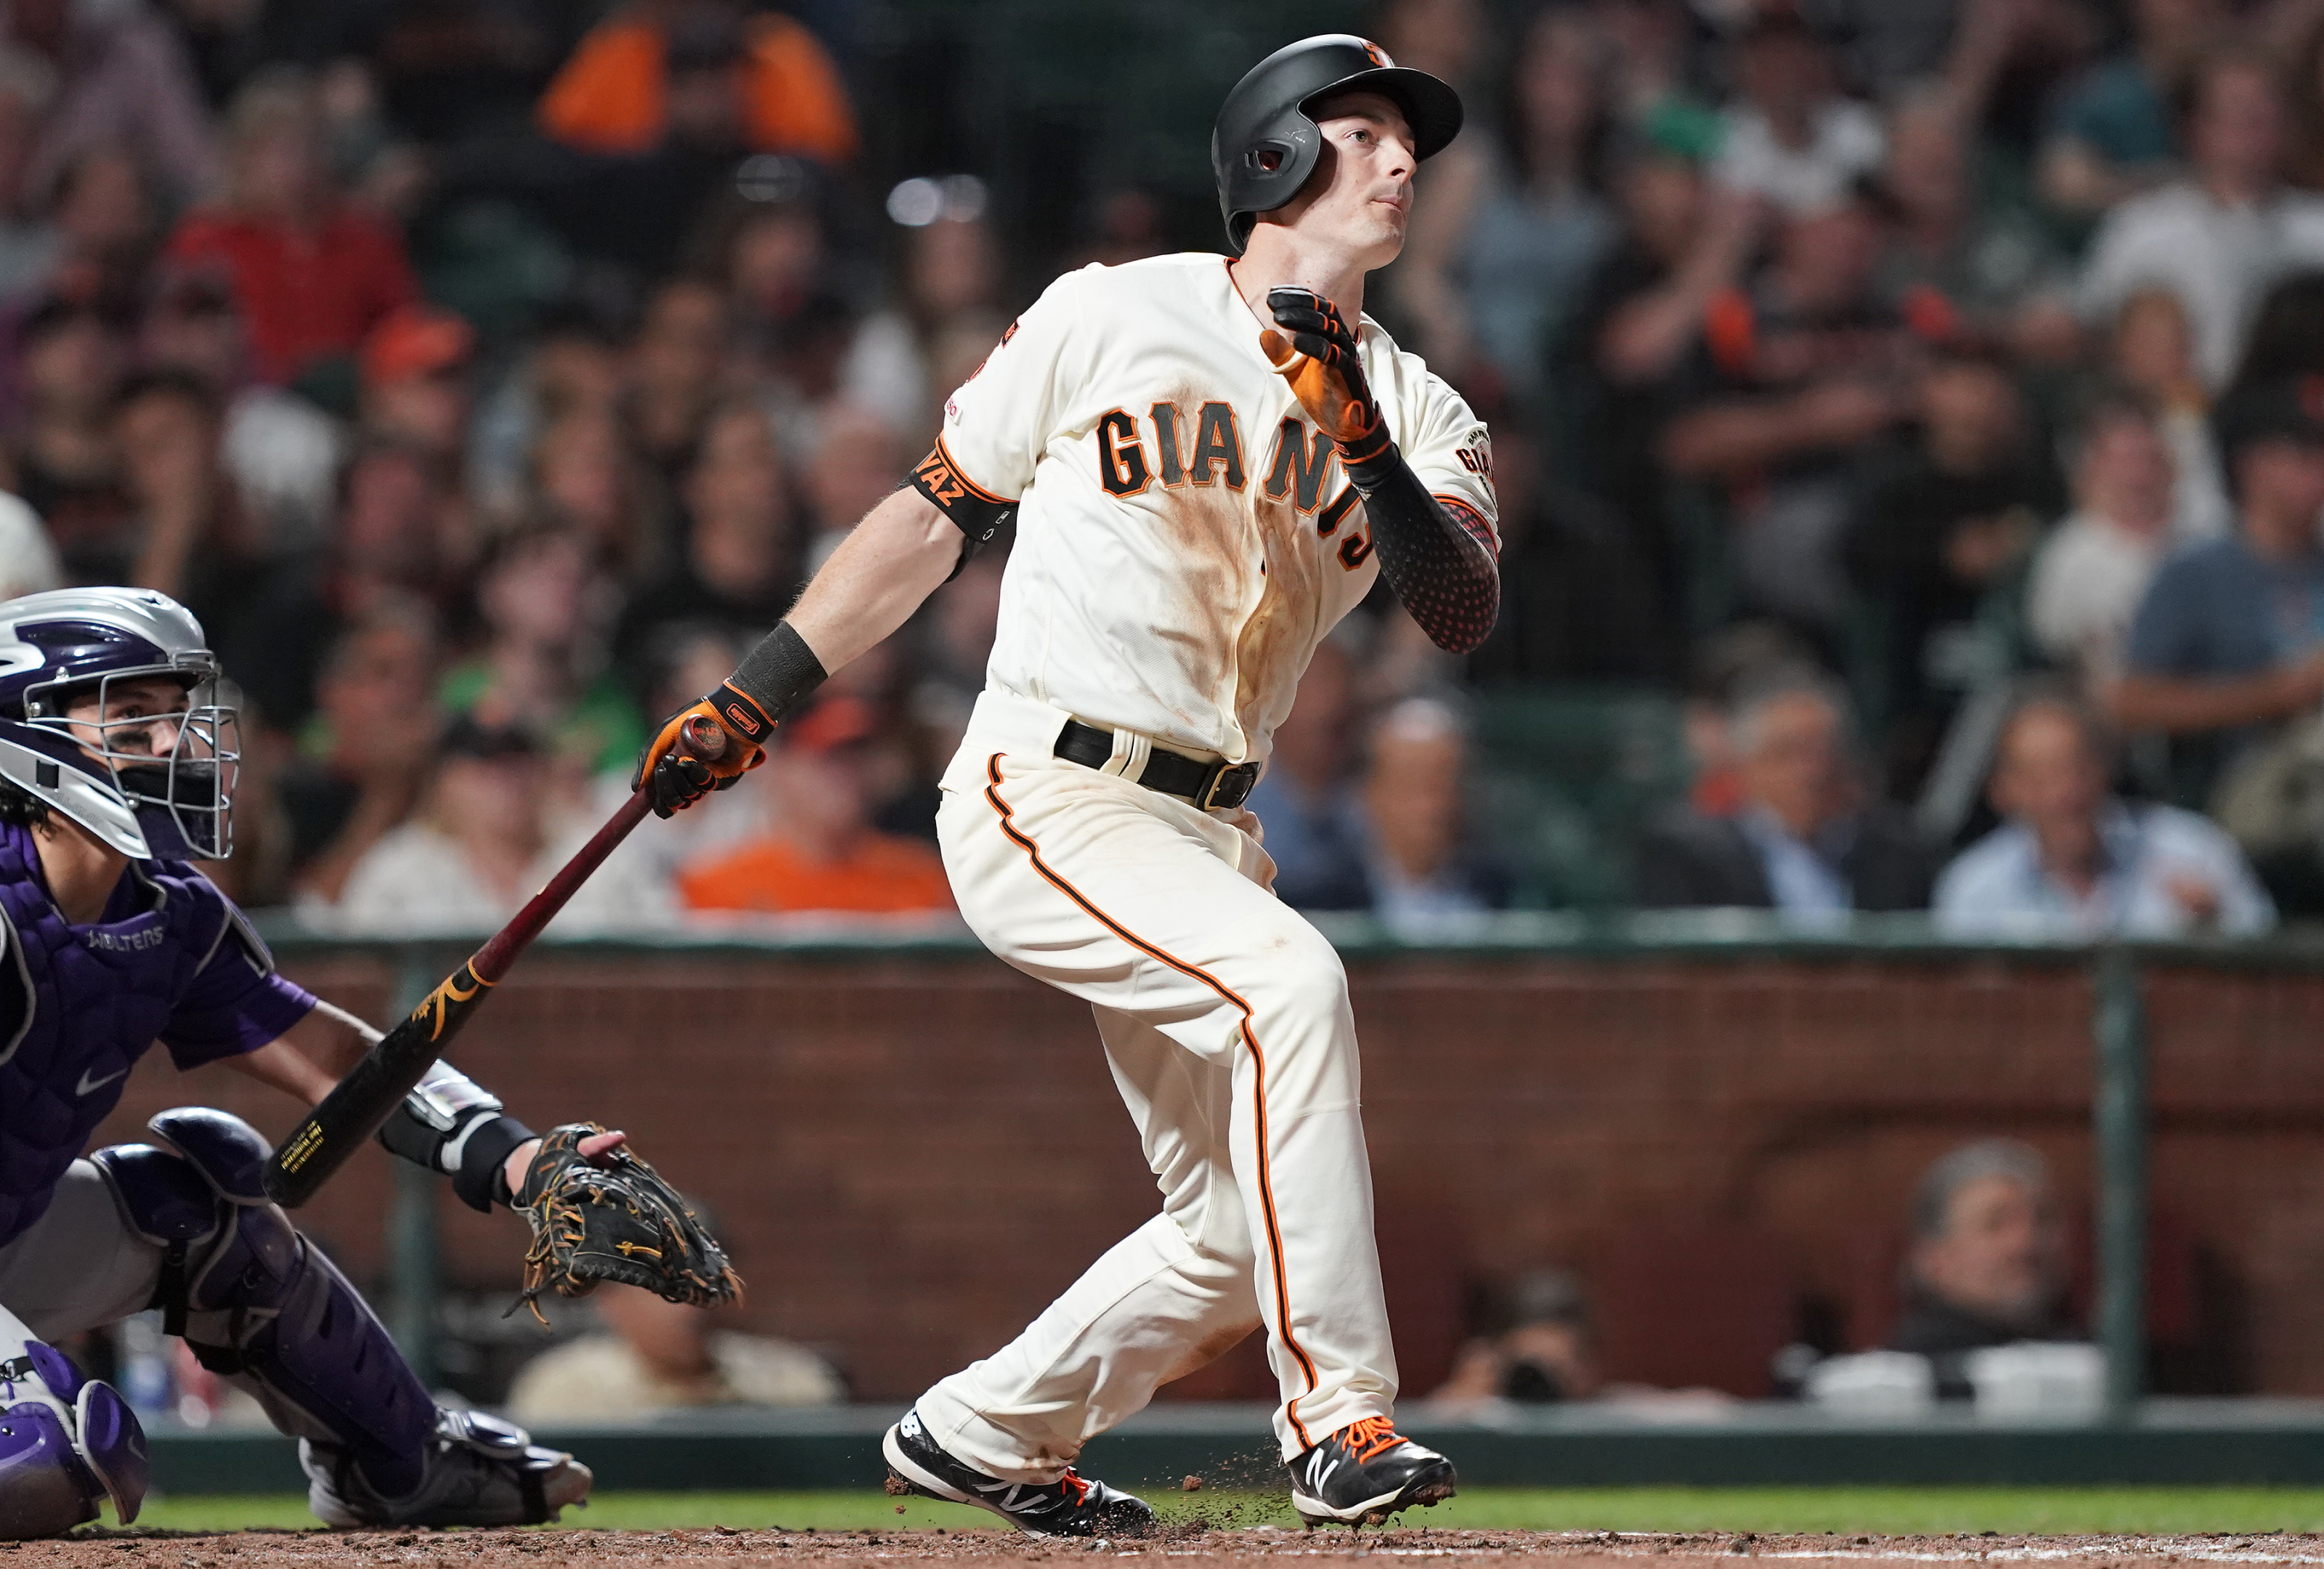 Could Brandon Crawford bat leadoff for the Giants in 2020?